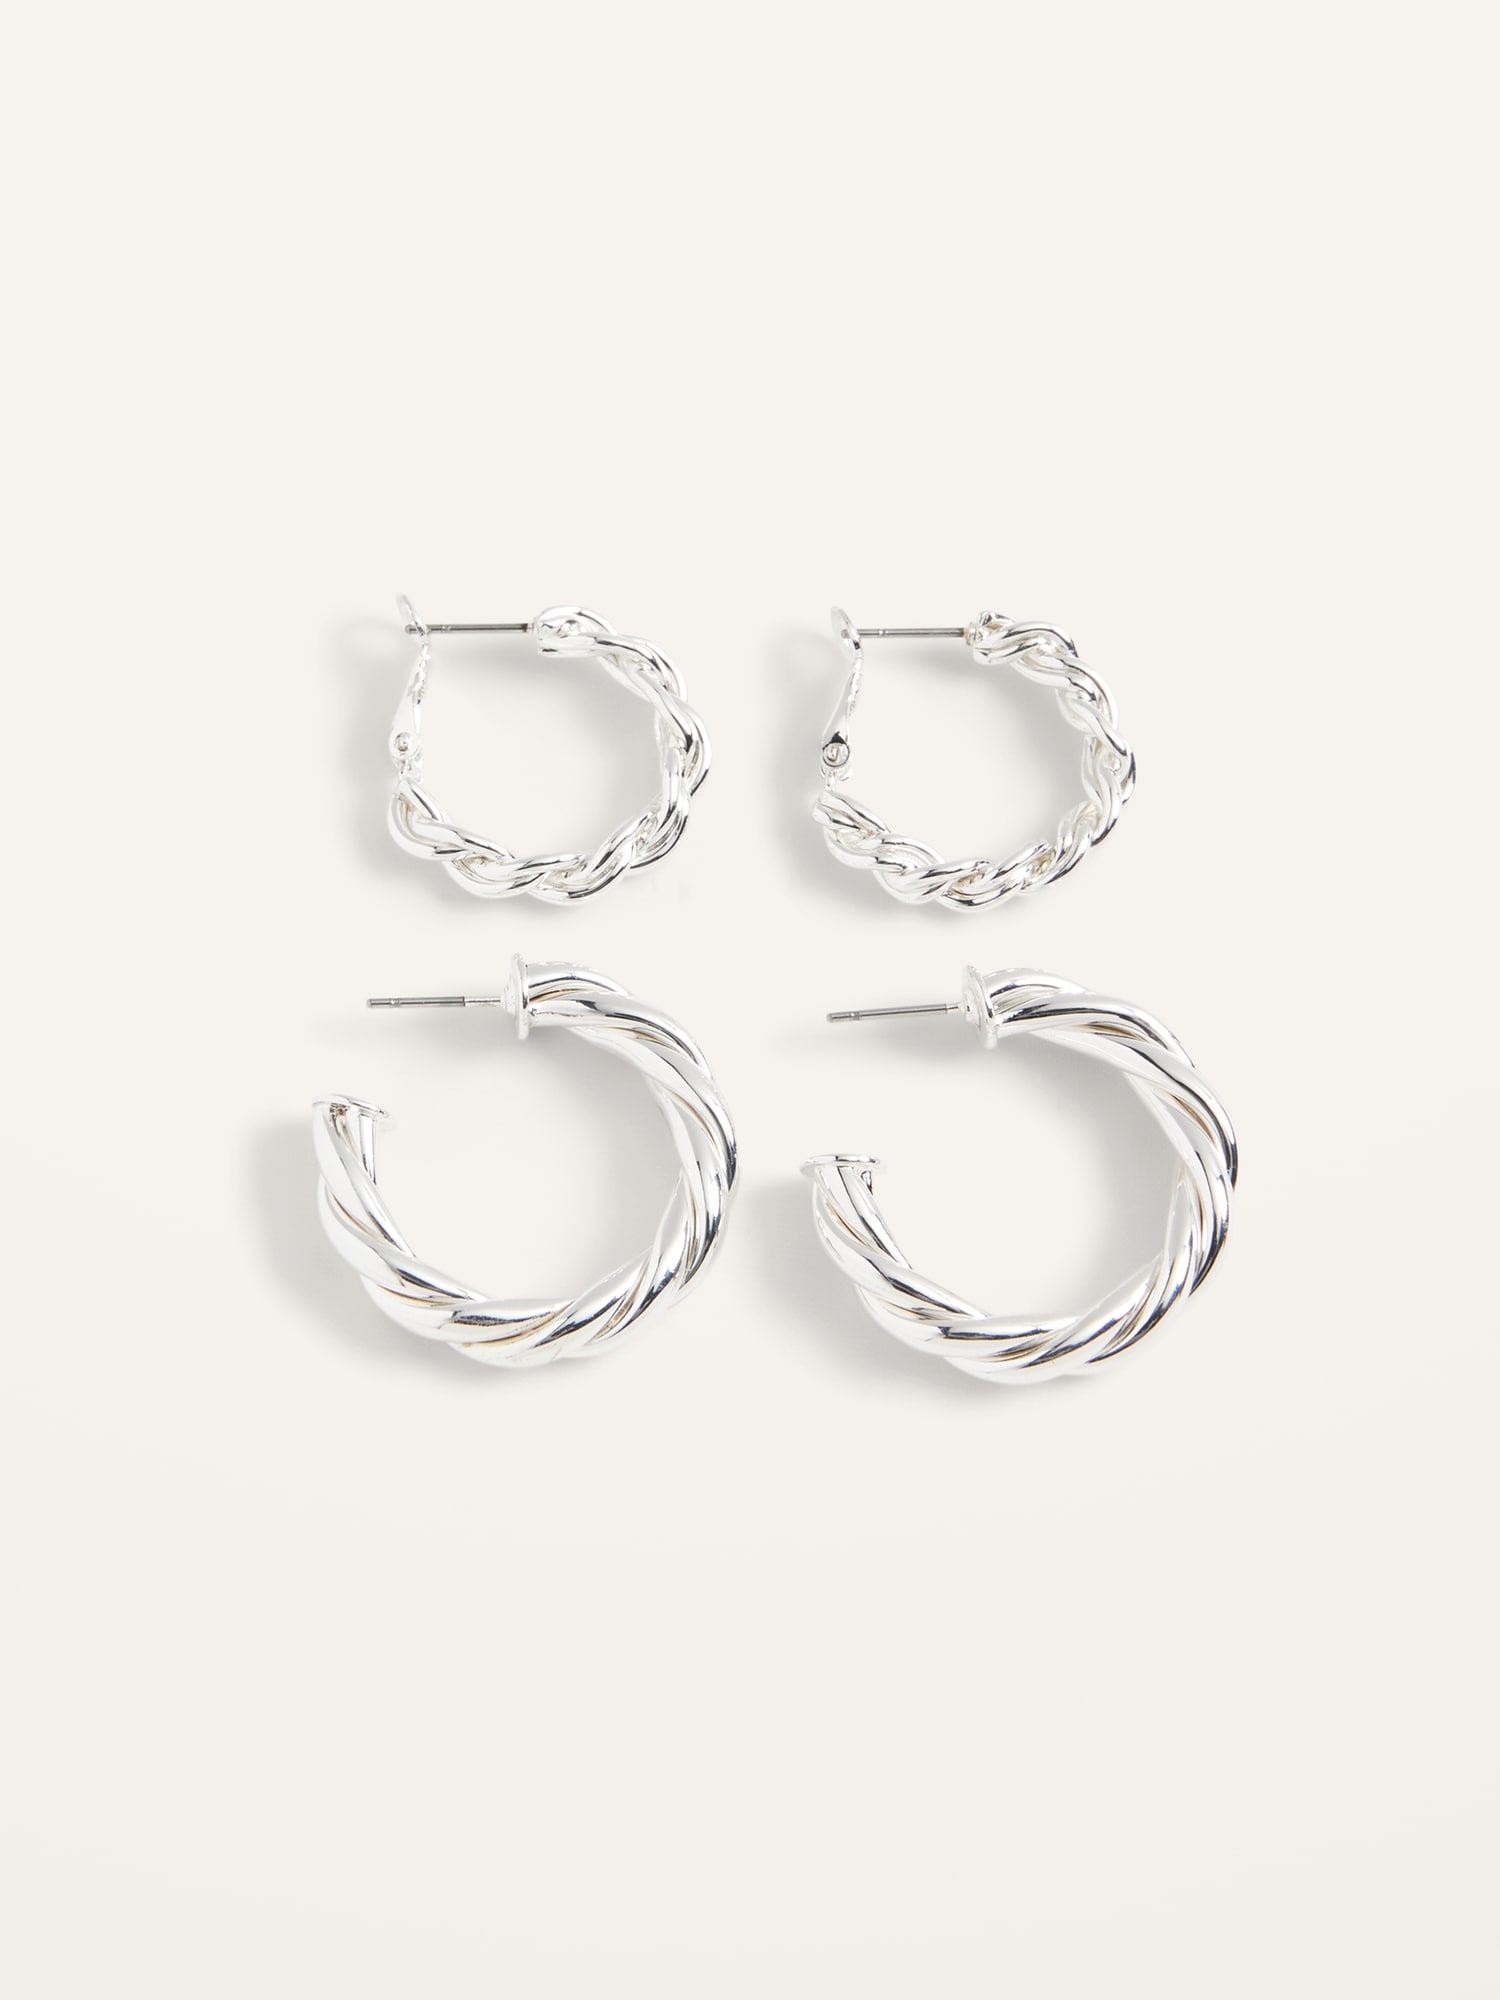 Old Navy Silver-Toned Twisted Hoop Earrings 2-Pack for Women gold. 1